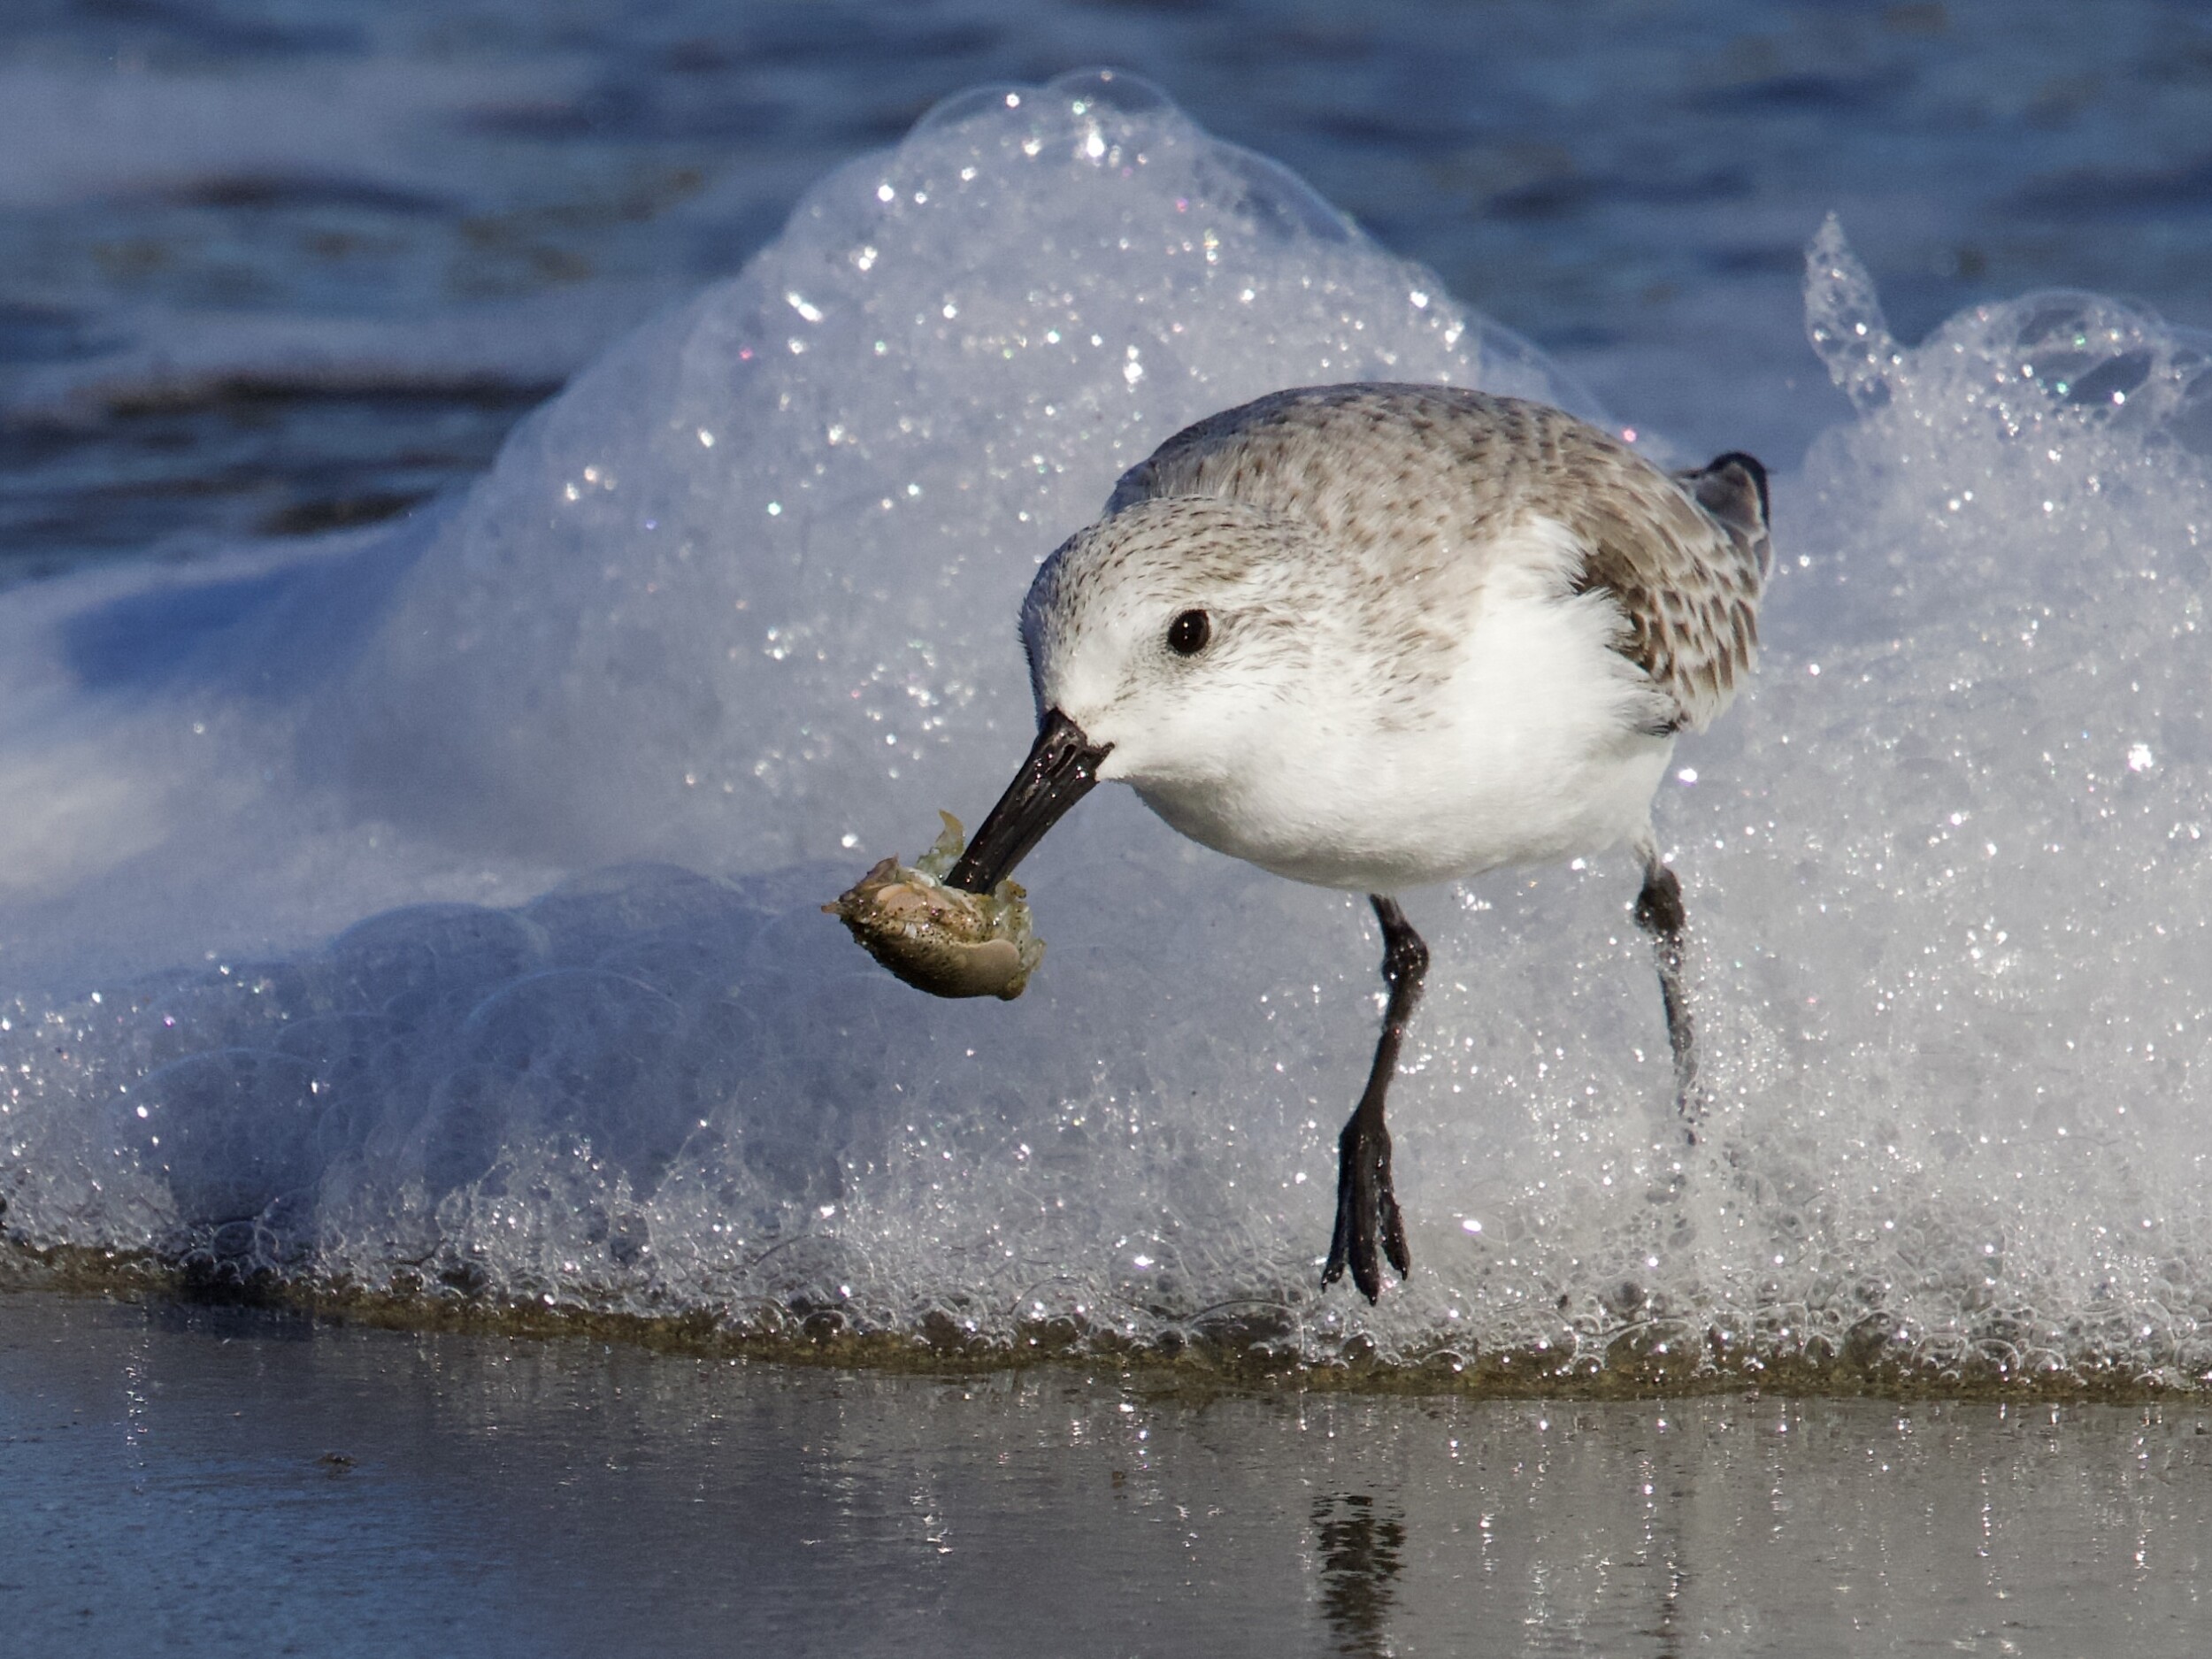 Sanderling Catching Mole Crab at Crissy Field